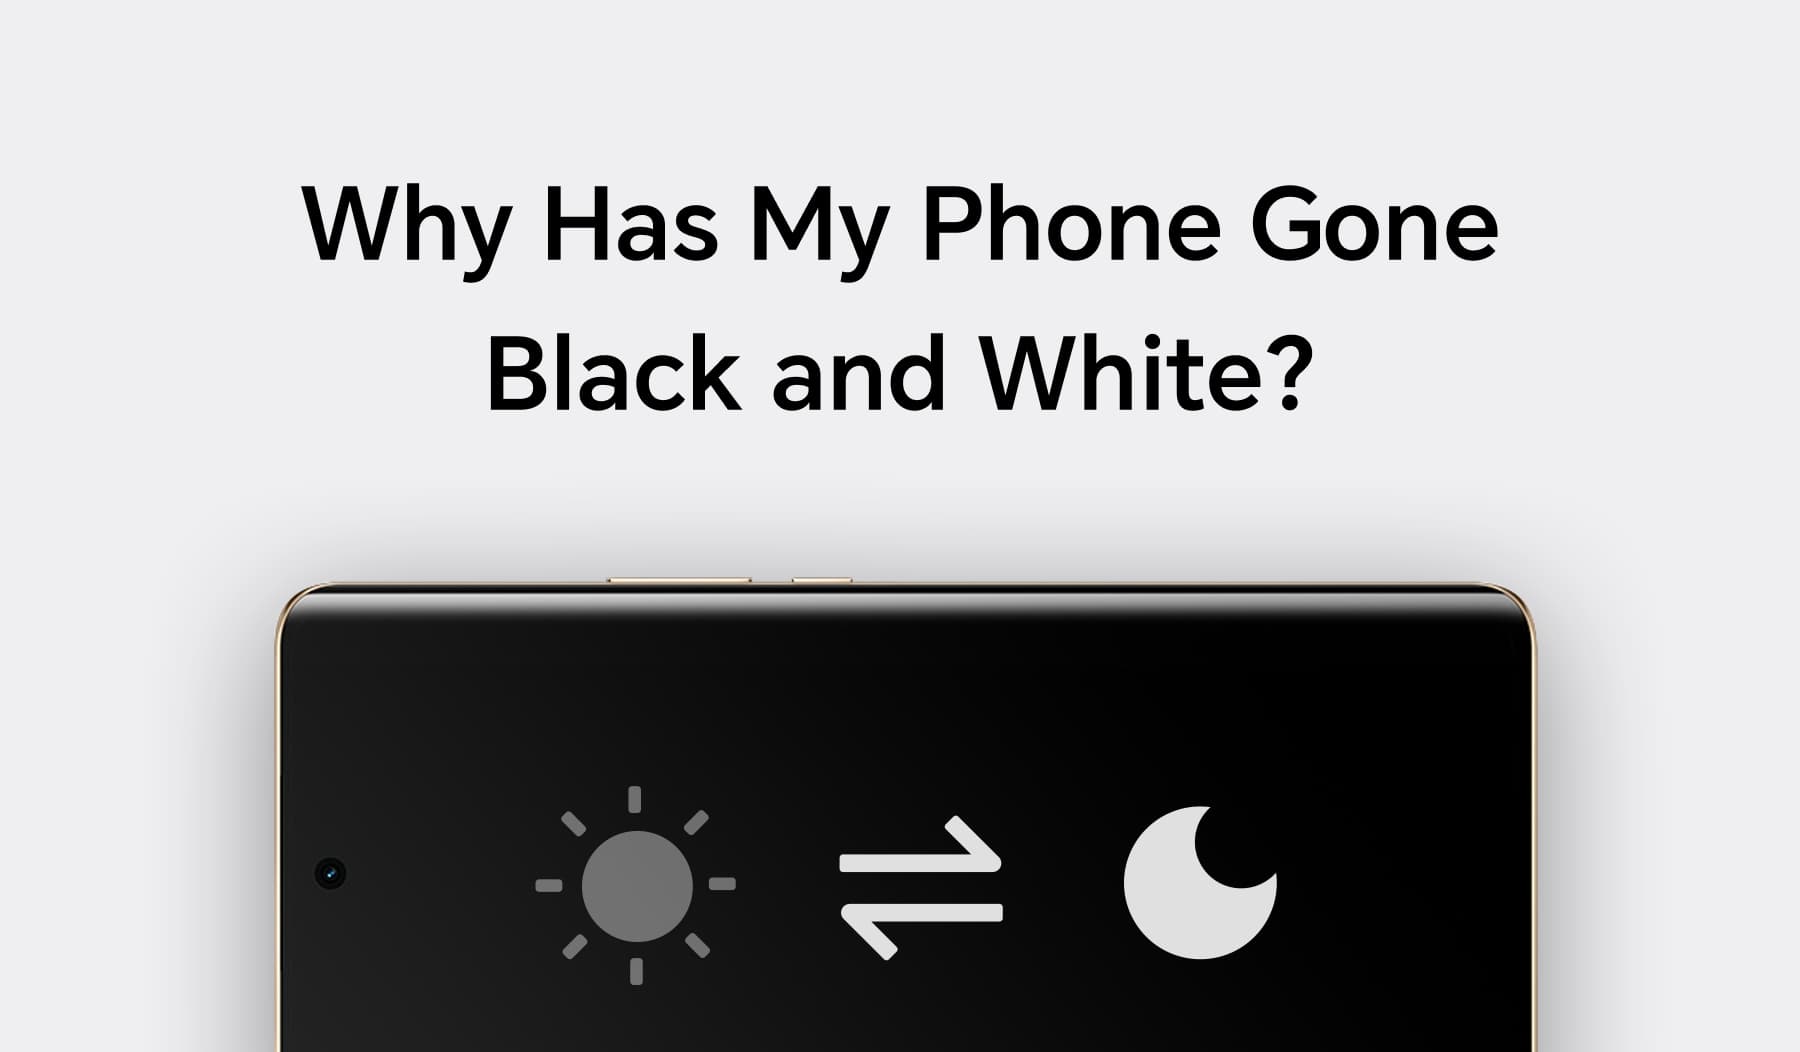 Why Has My Phone Gone Black and White?